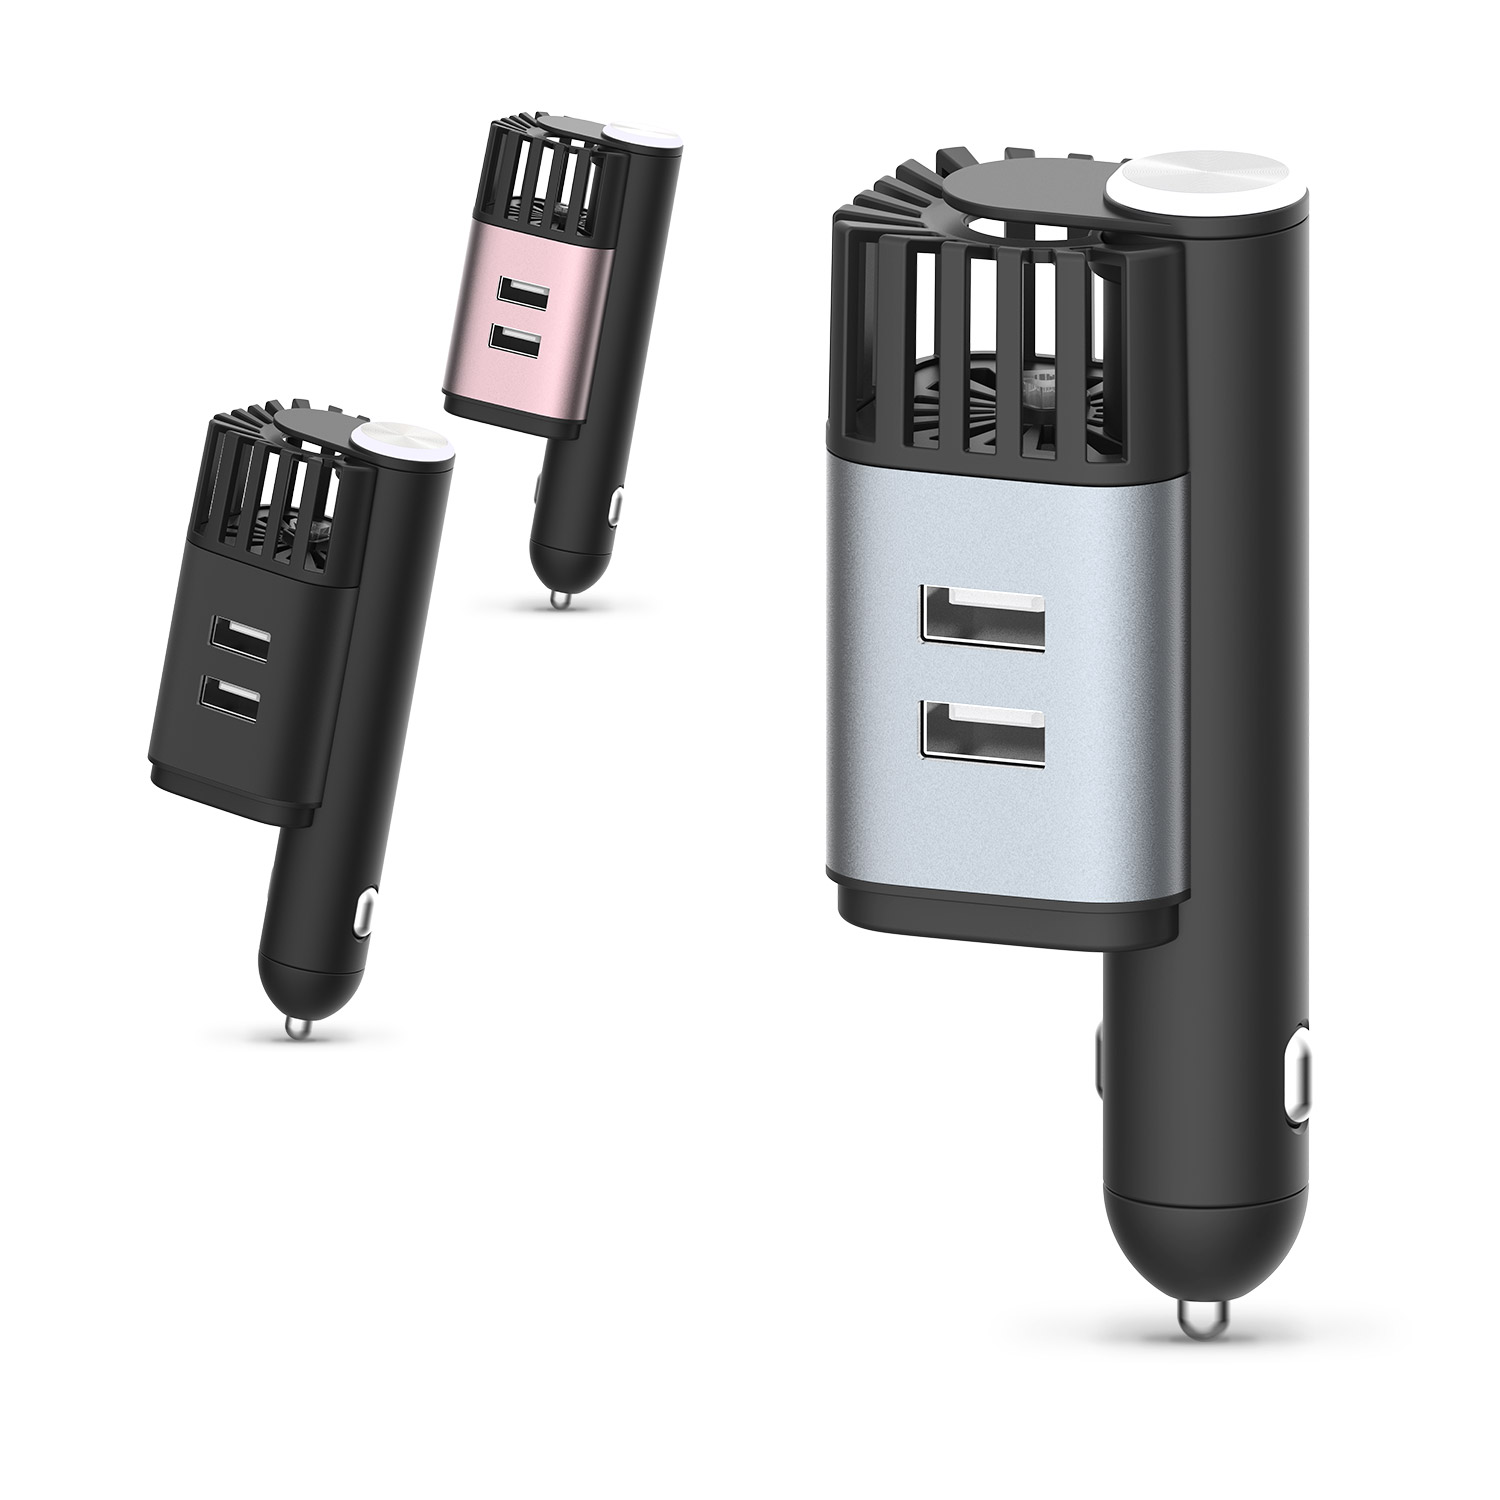 10th Gen 2-in-1 Car Charger Air Purifier JO-6310 with QC3.0 QC2.0 Super Fast Charge